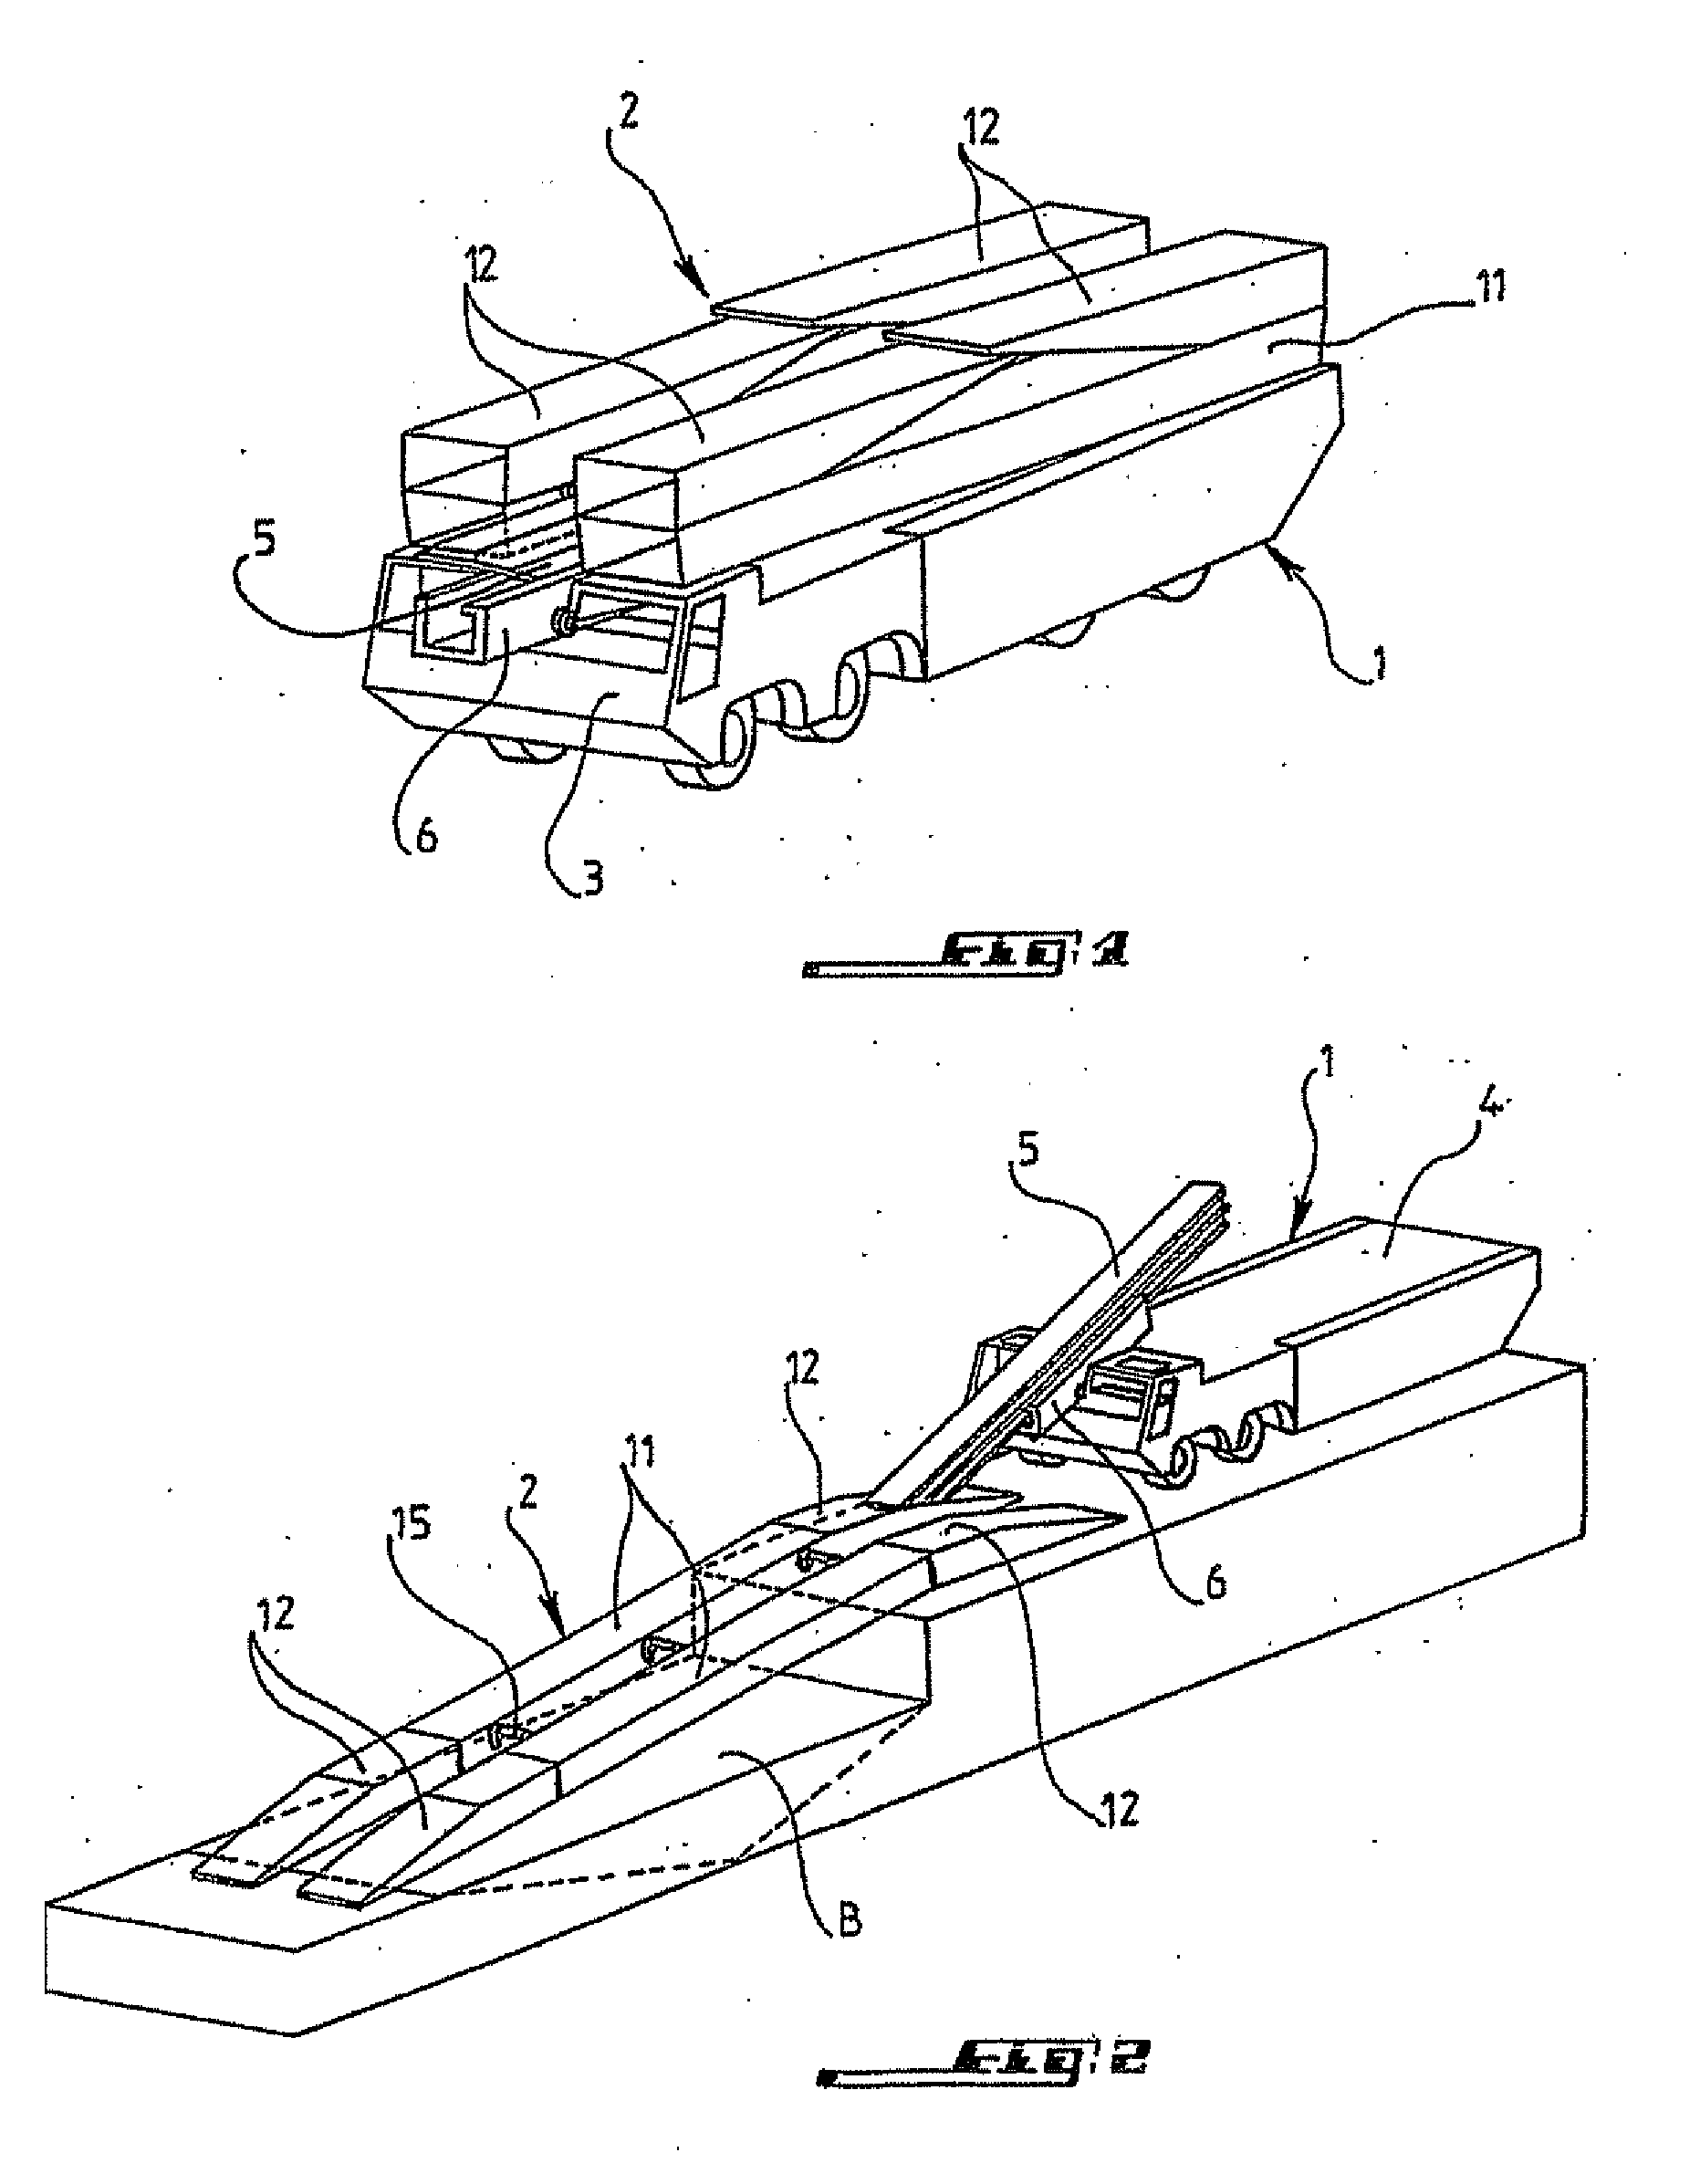 System for transporting a span on a road vehicle capable of being transformed into an amphibious vehicle enabling the crossing of a dry or water-filled gap by any road vehicle